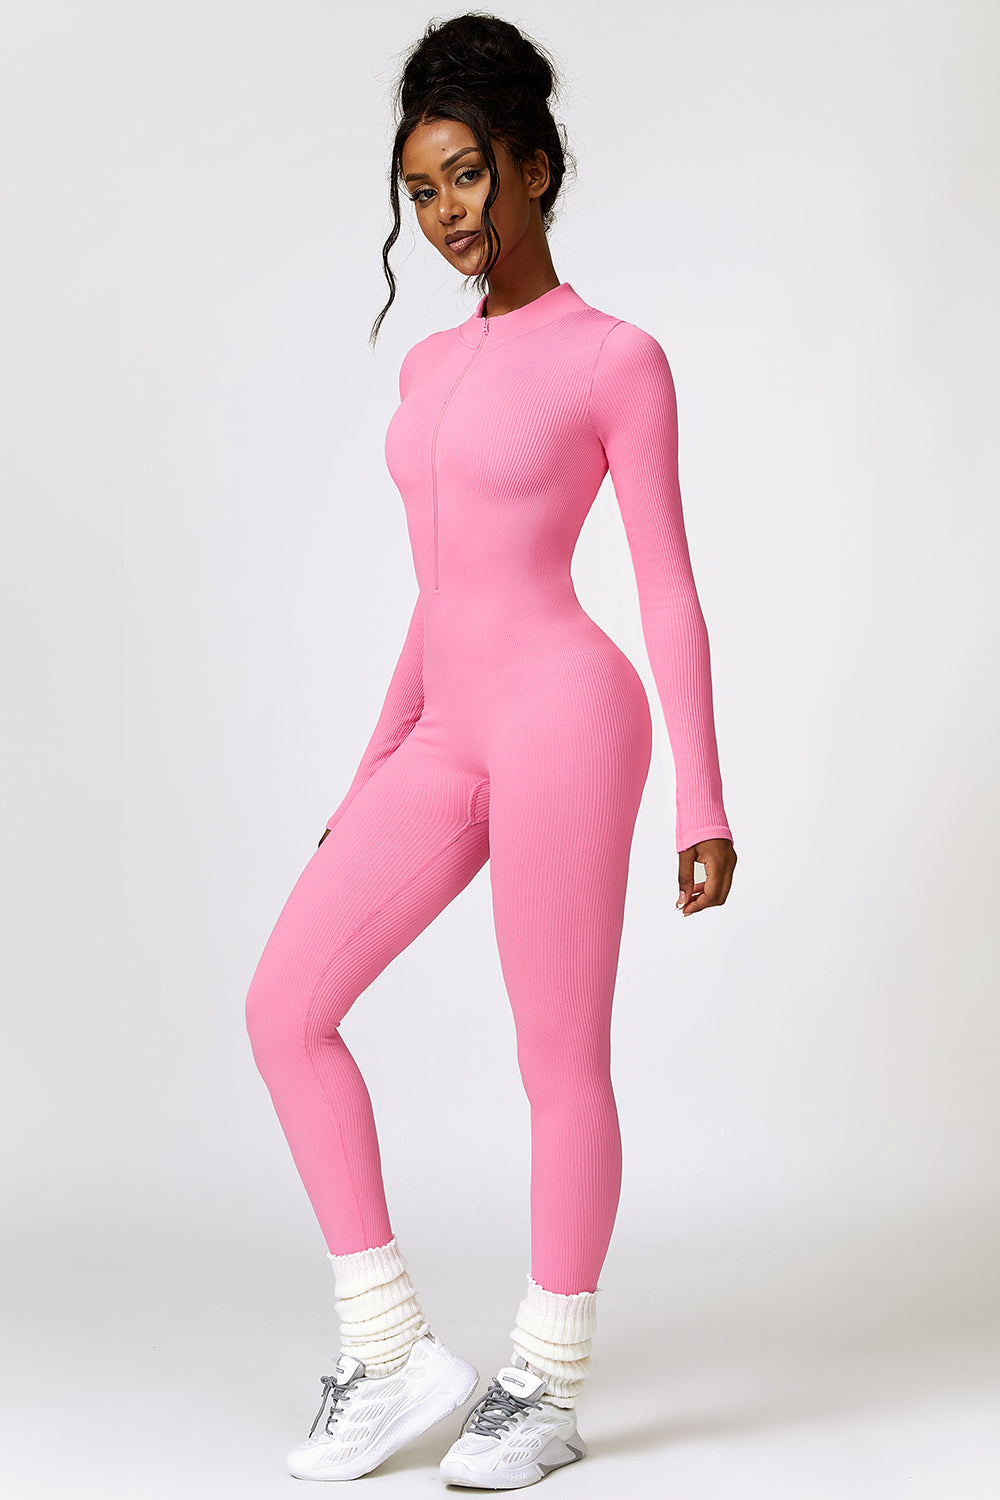 a woman in a pink bodysuit posing for a picture